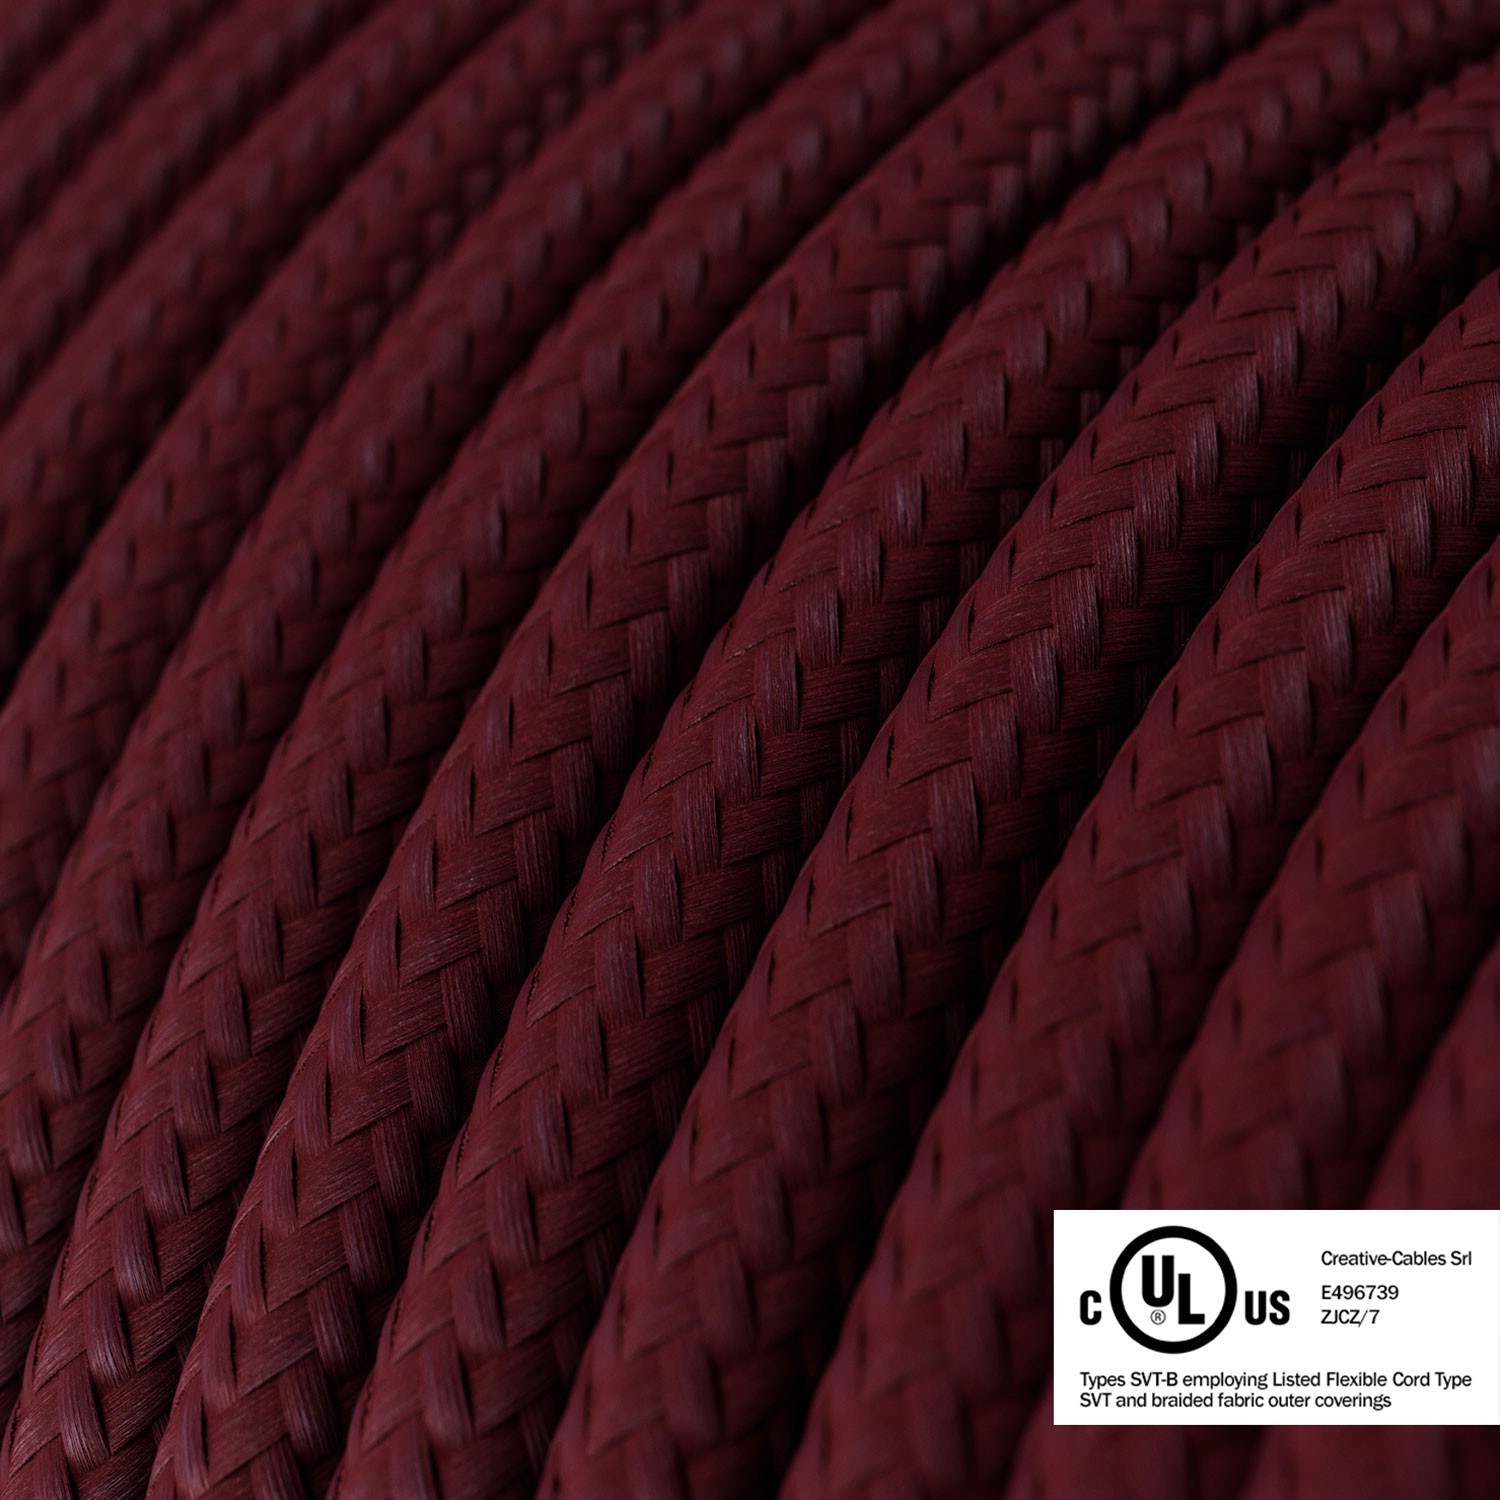 Round Electric Cable 150 ft (45,72 m) coil RM19 Burgundy Rayon - UL listed